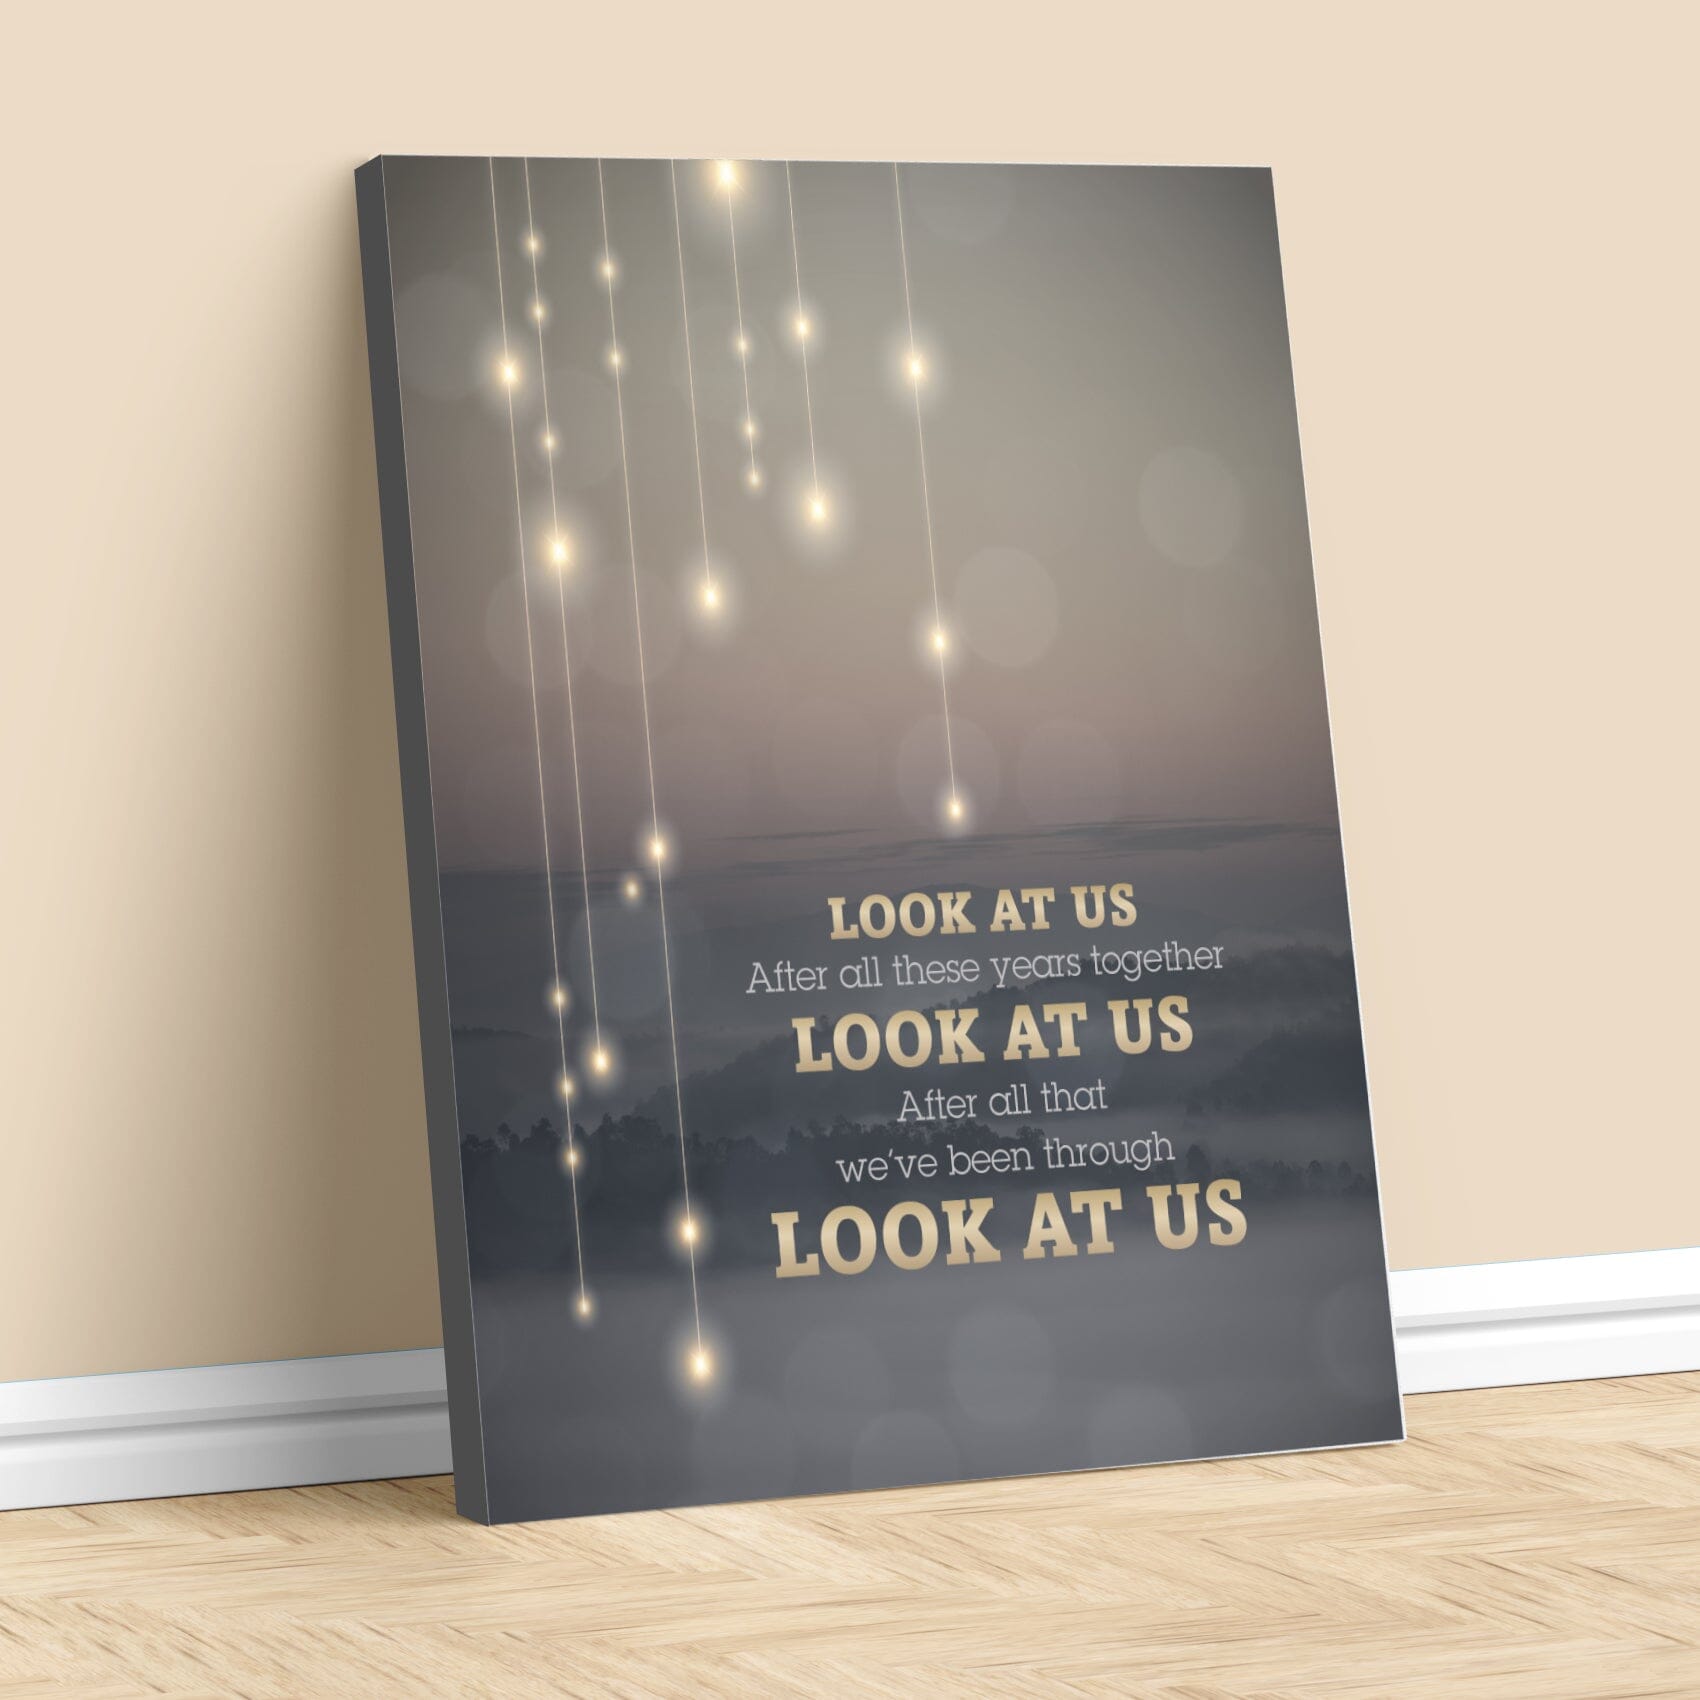 Look at Us by Vince Gill - Pop Country Song Art Song Lyrics Art Song Lyrics Art 11x14 Canvas Wrap 